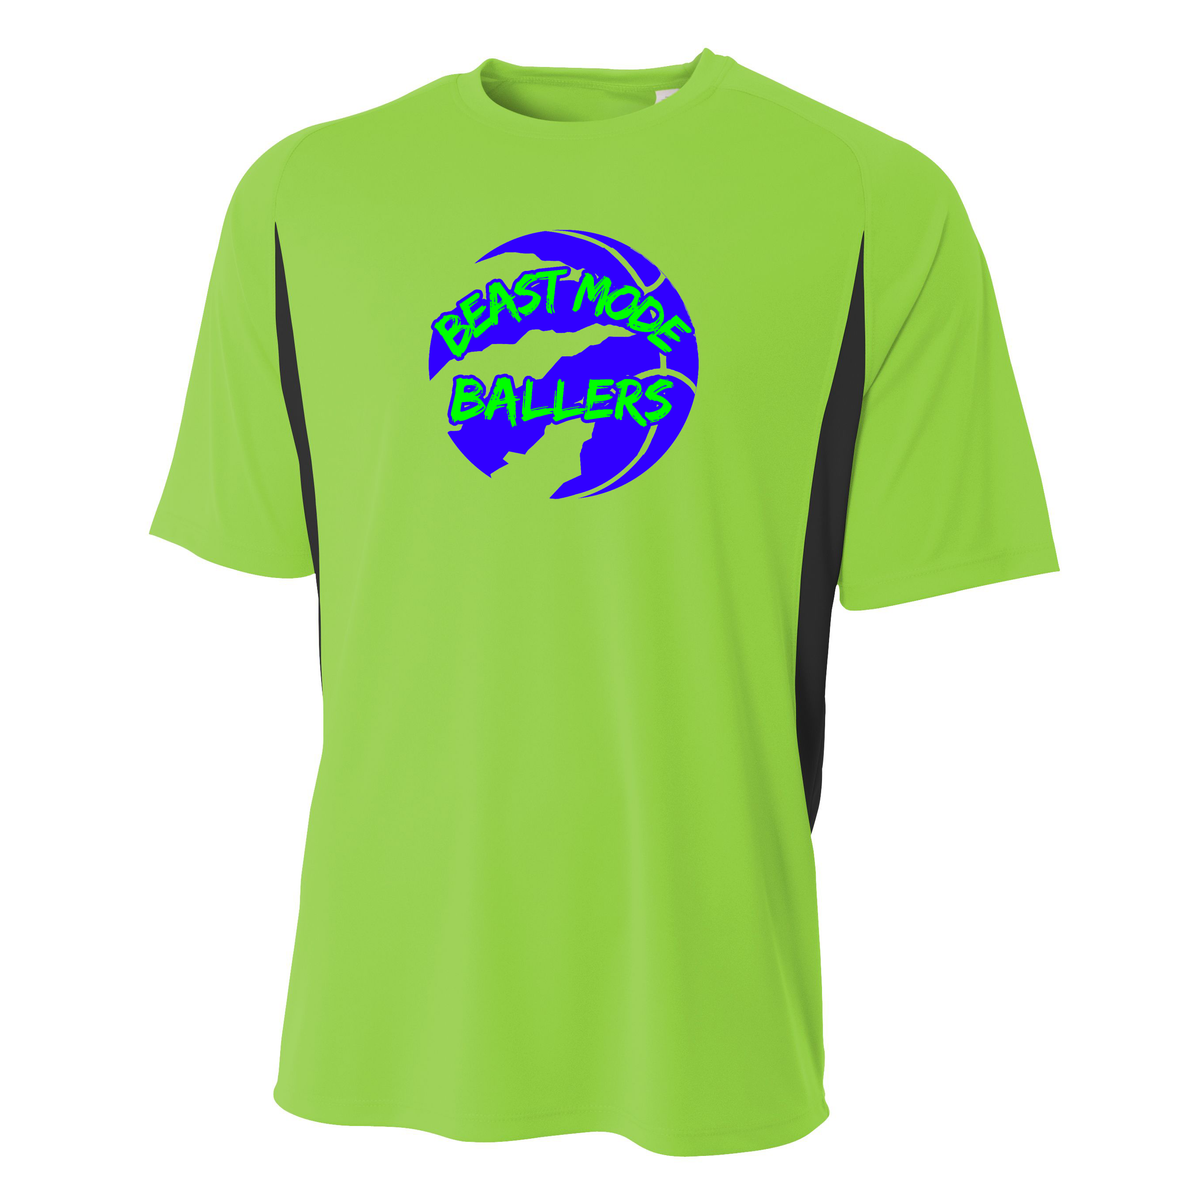 Beast Mode Ballers Color Blocked Cooling Performance T-Shirt